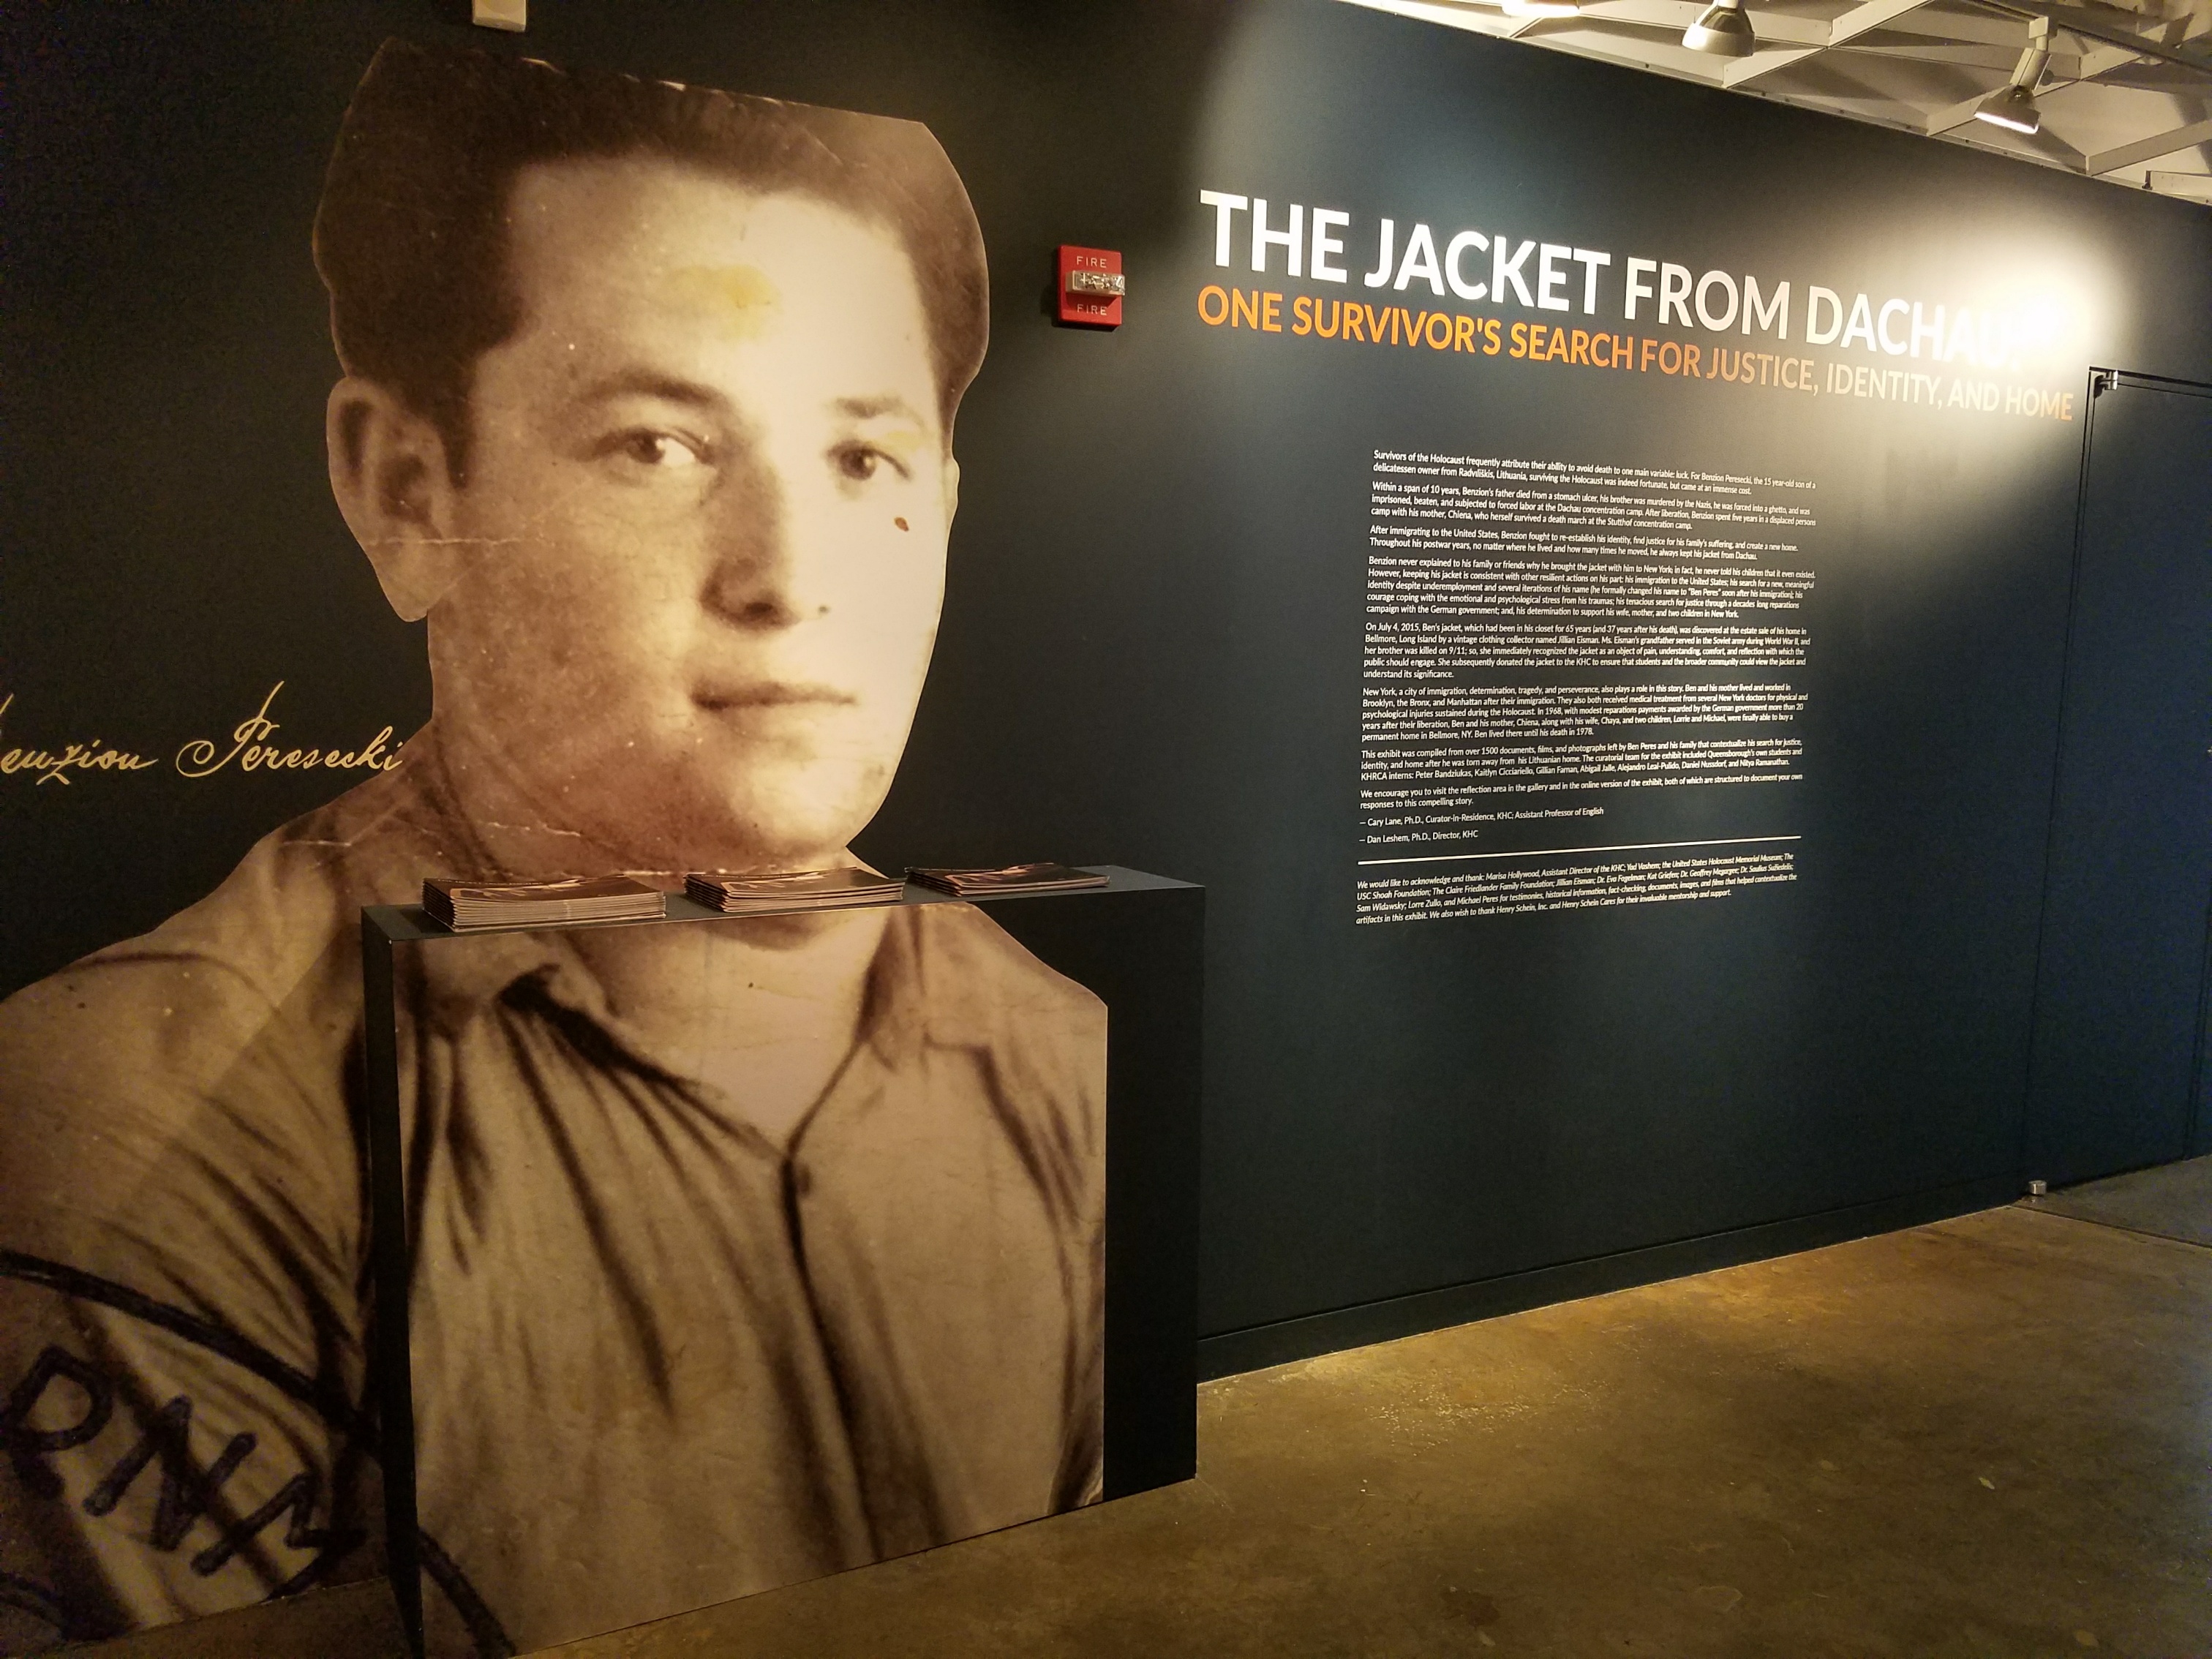 The Jacket from Dachau: a showcase of Holocaust resilience